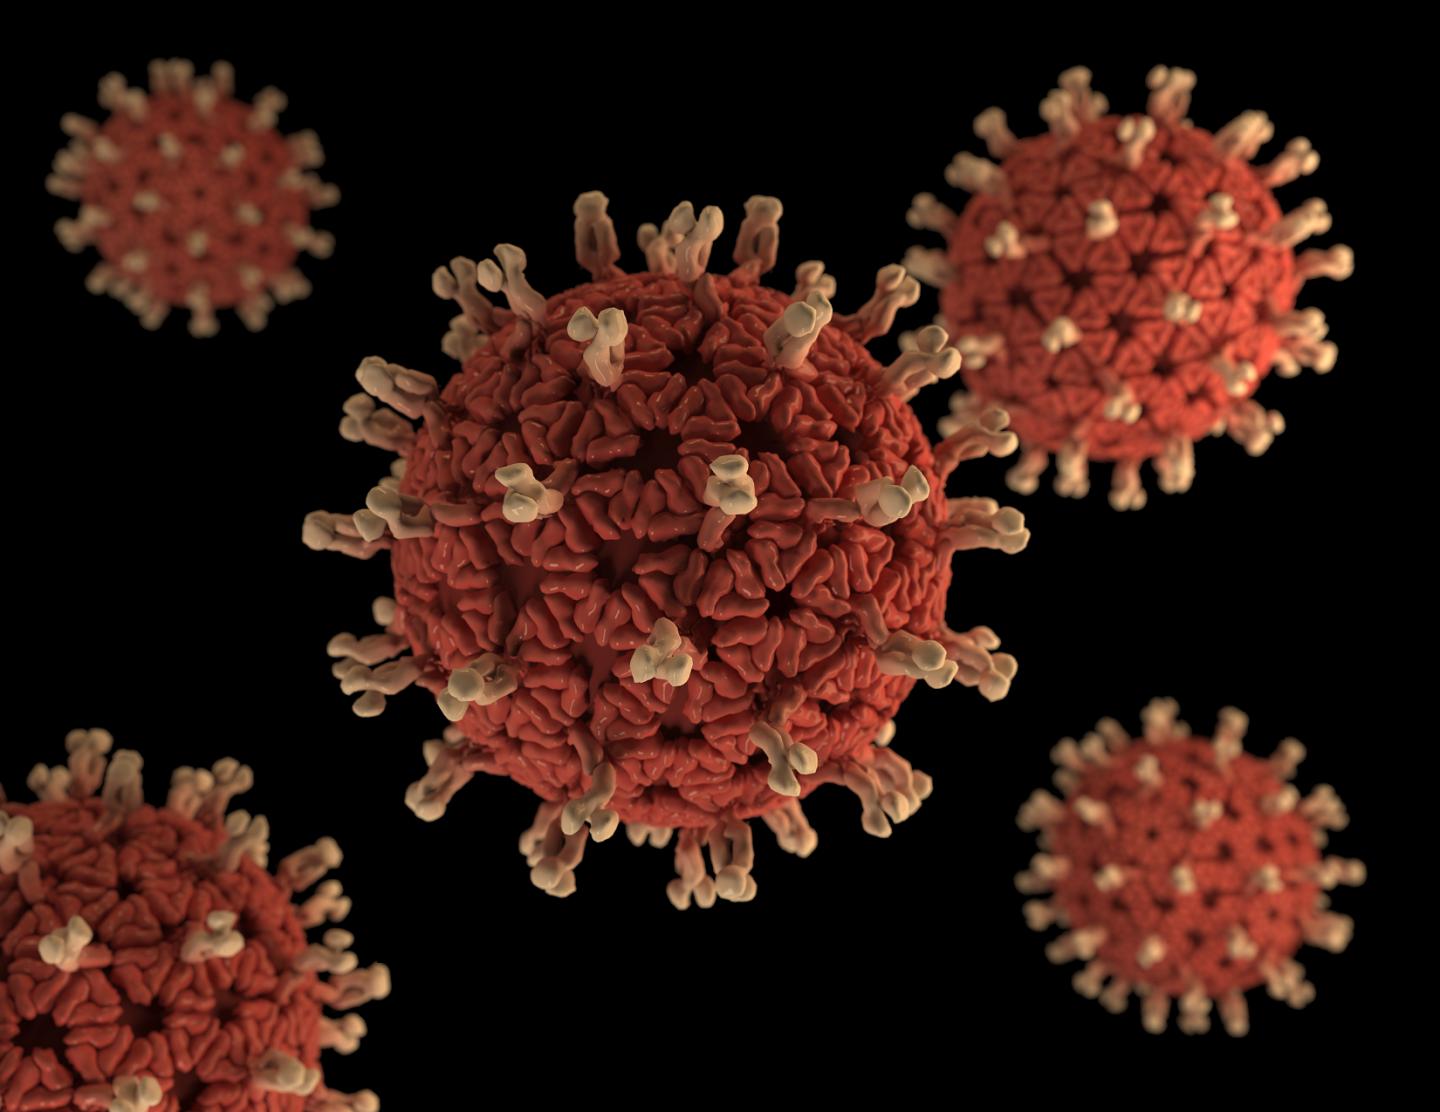 3-D Graphical Representation of a Number of Rotavirus Virions